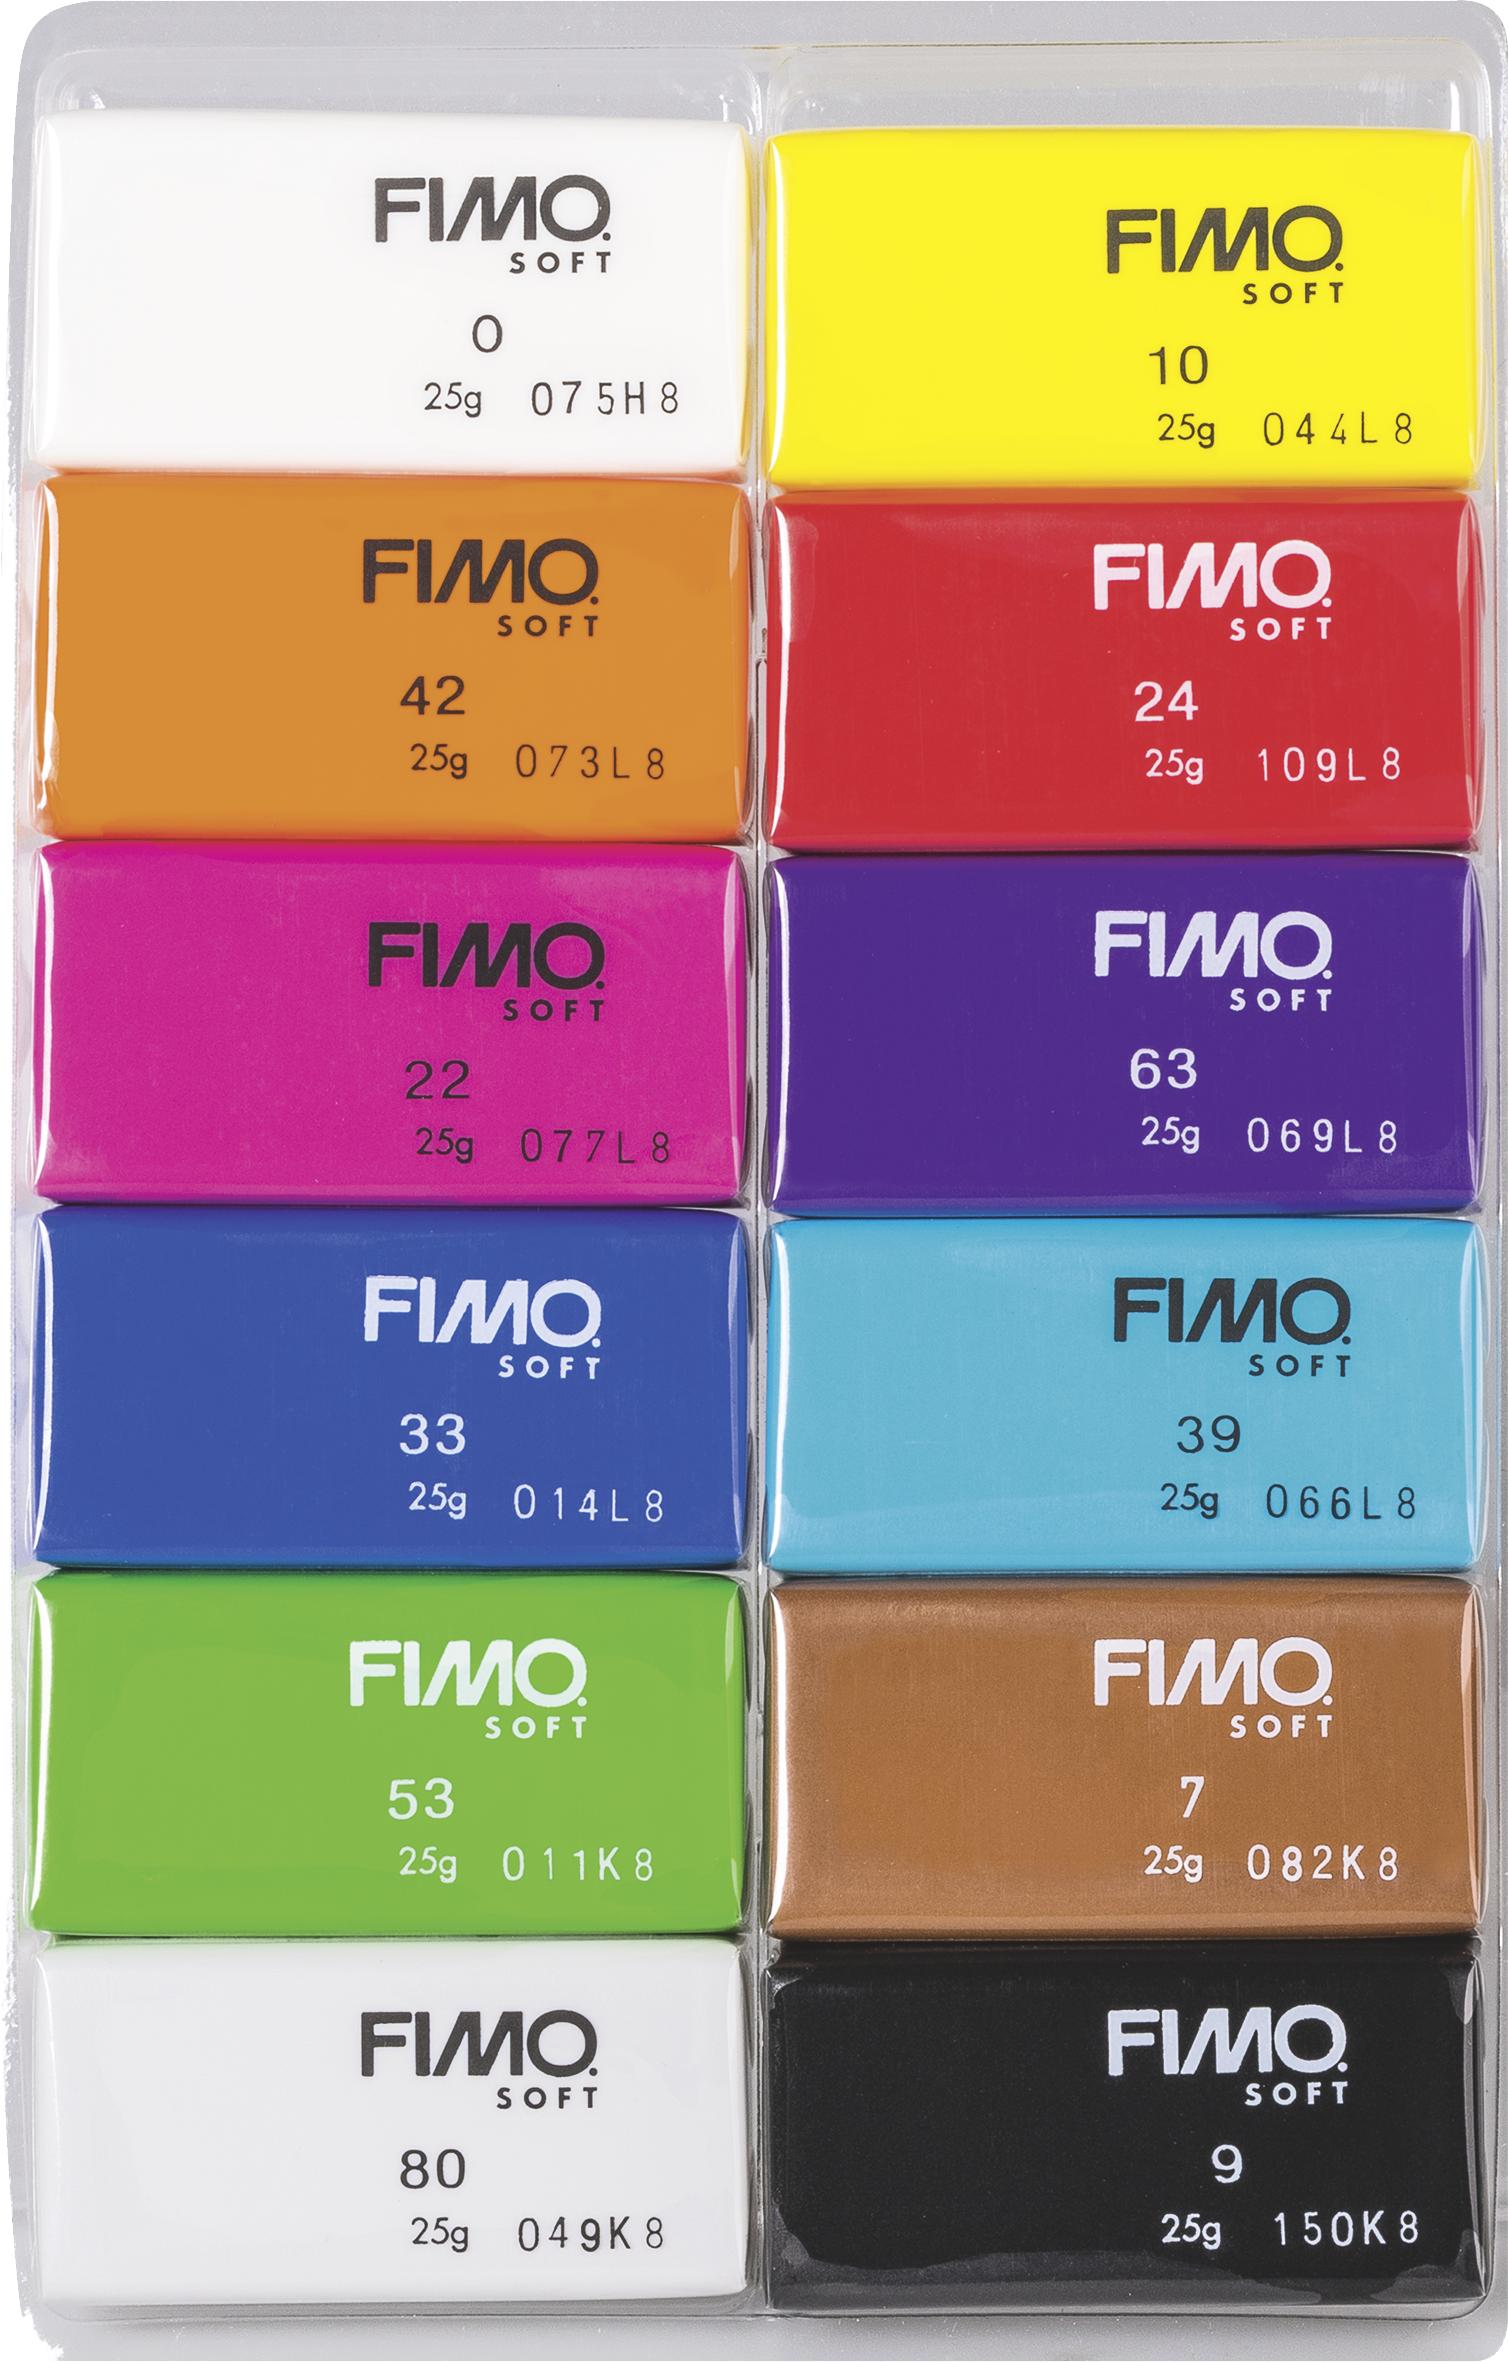 MODELLIERMASSE FIMO SOFT "COLOUR PACK" SORTIERT